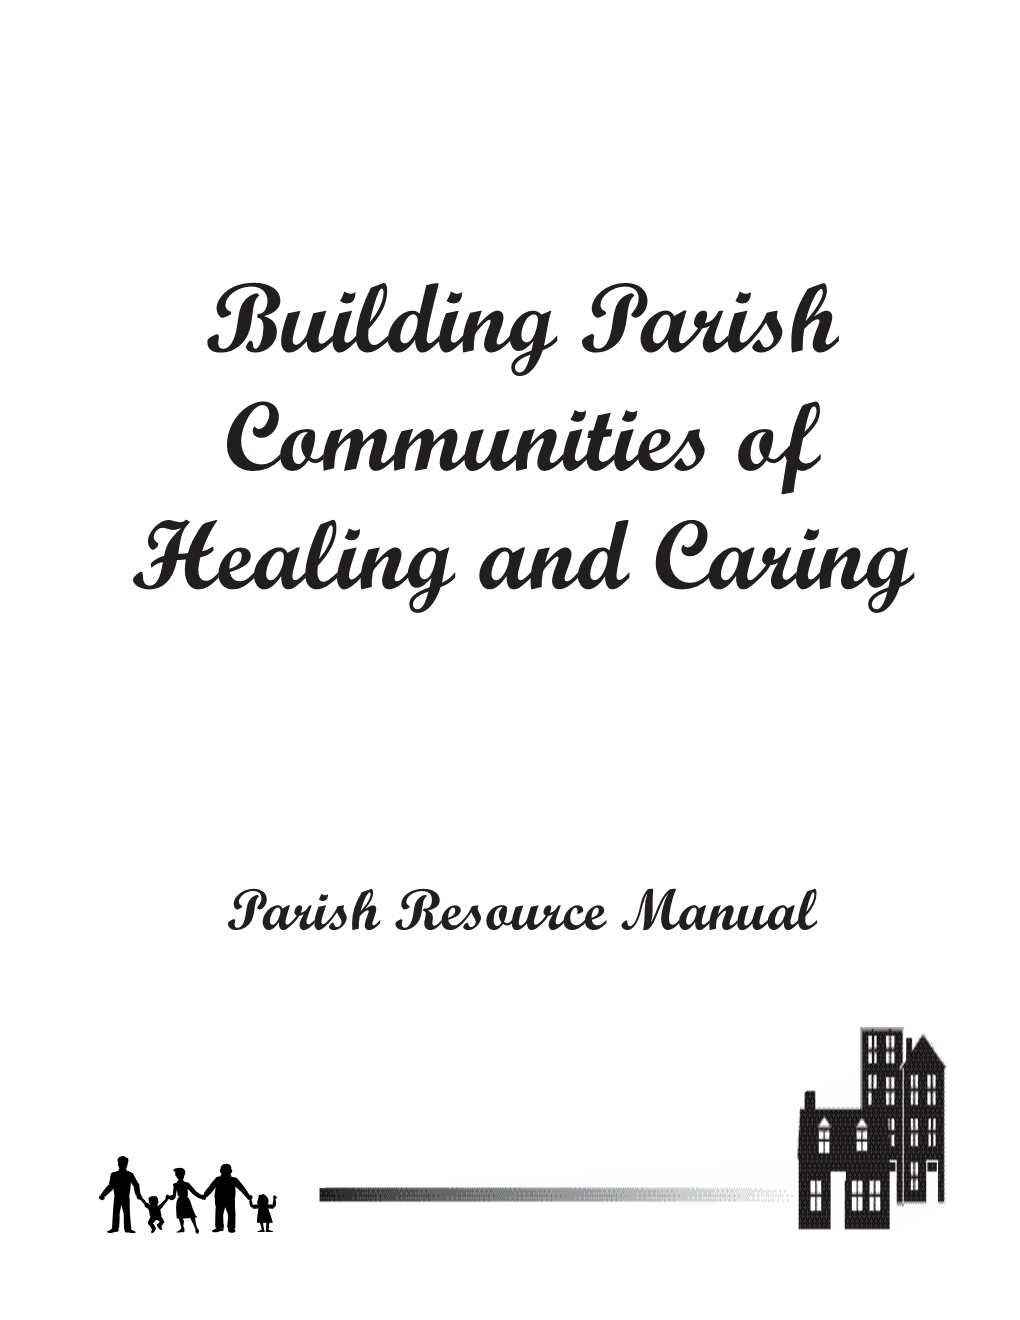 Opening Our Hearts: Building Parish Communities of Healing and Caring